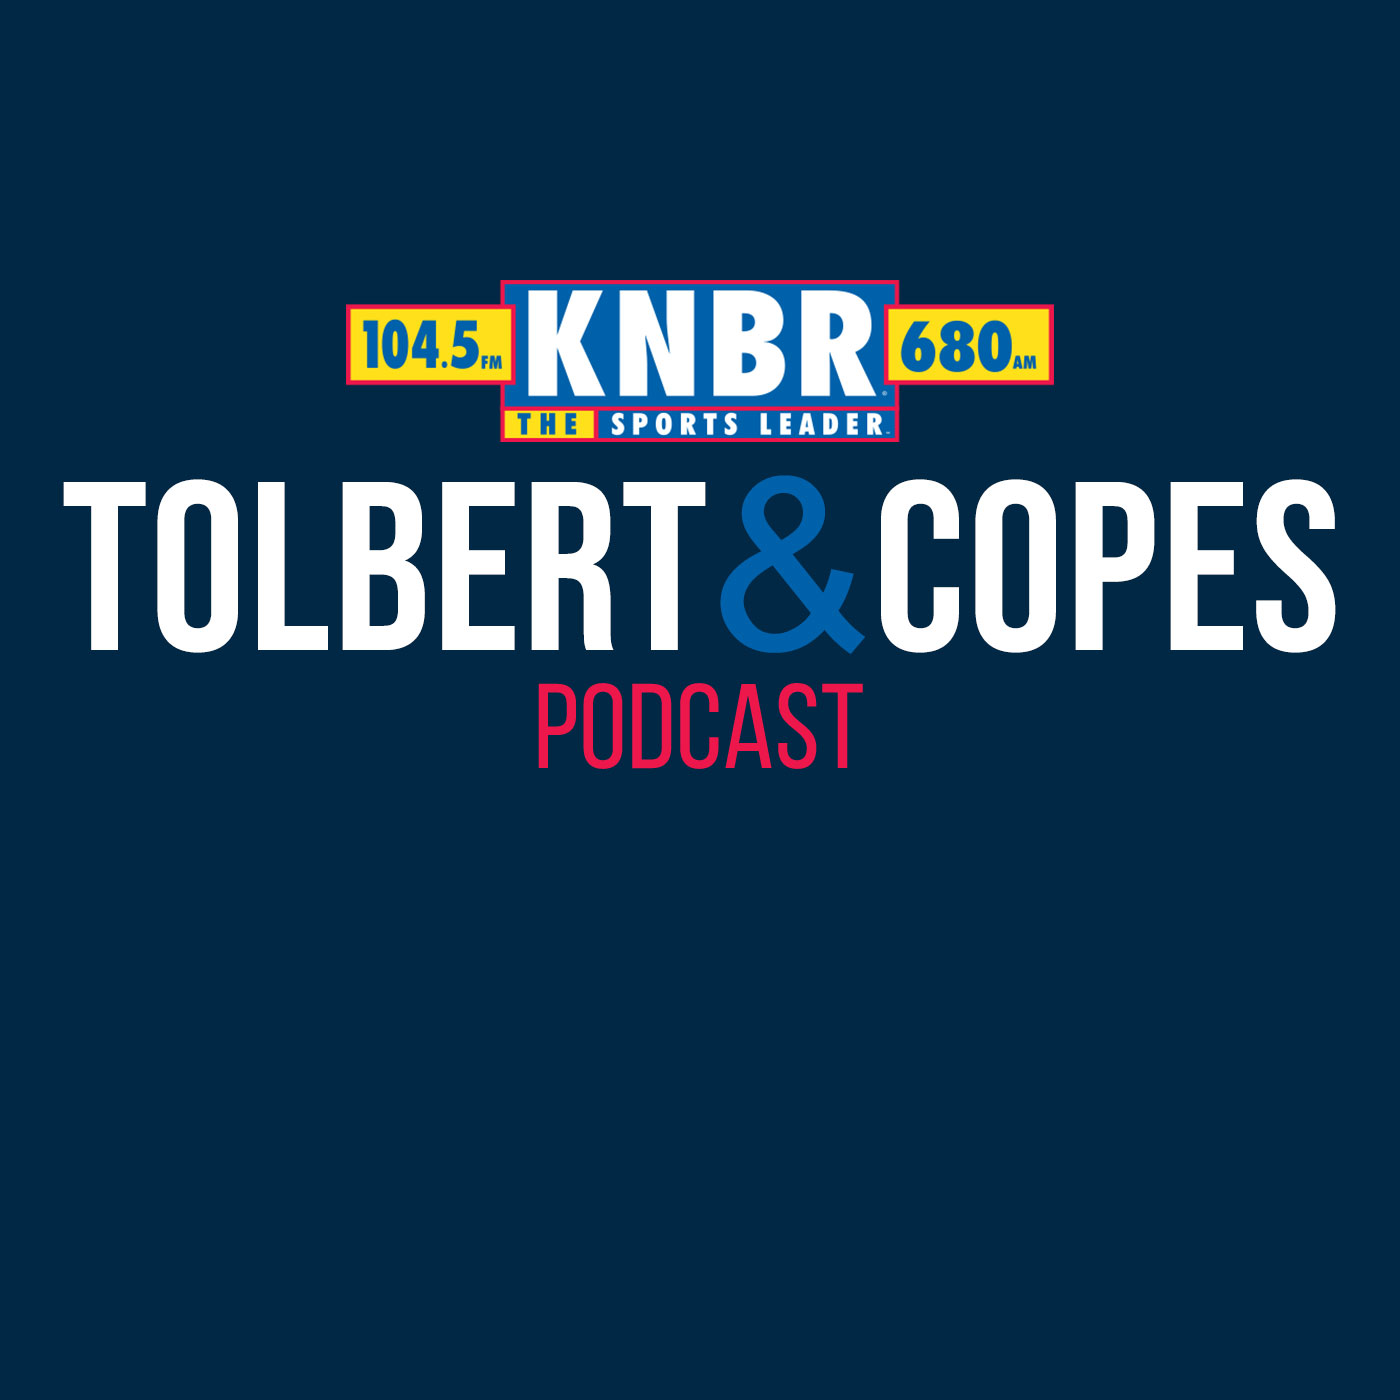 6-16 Bob McKillop joins Tolbert & Copes to discuss how Steph Curry has developed from his time at Davidson to the pros